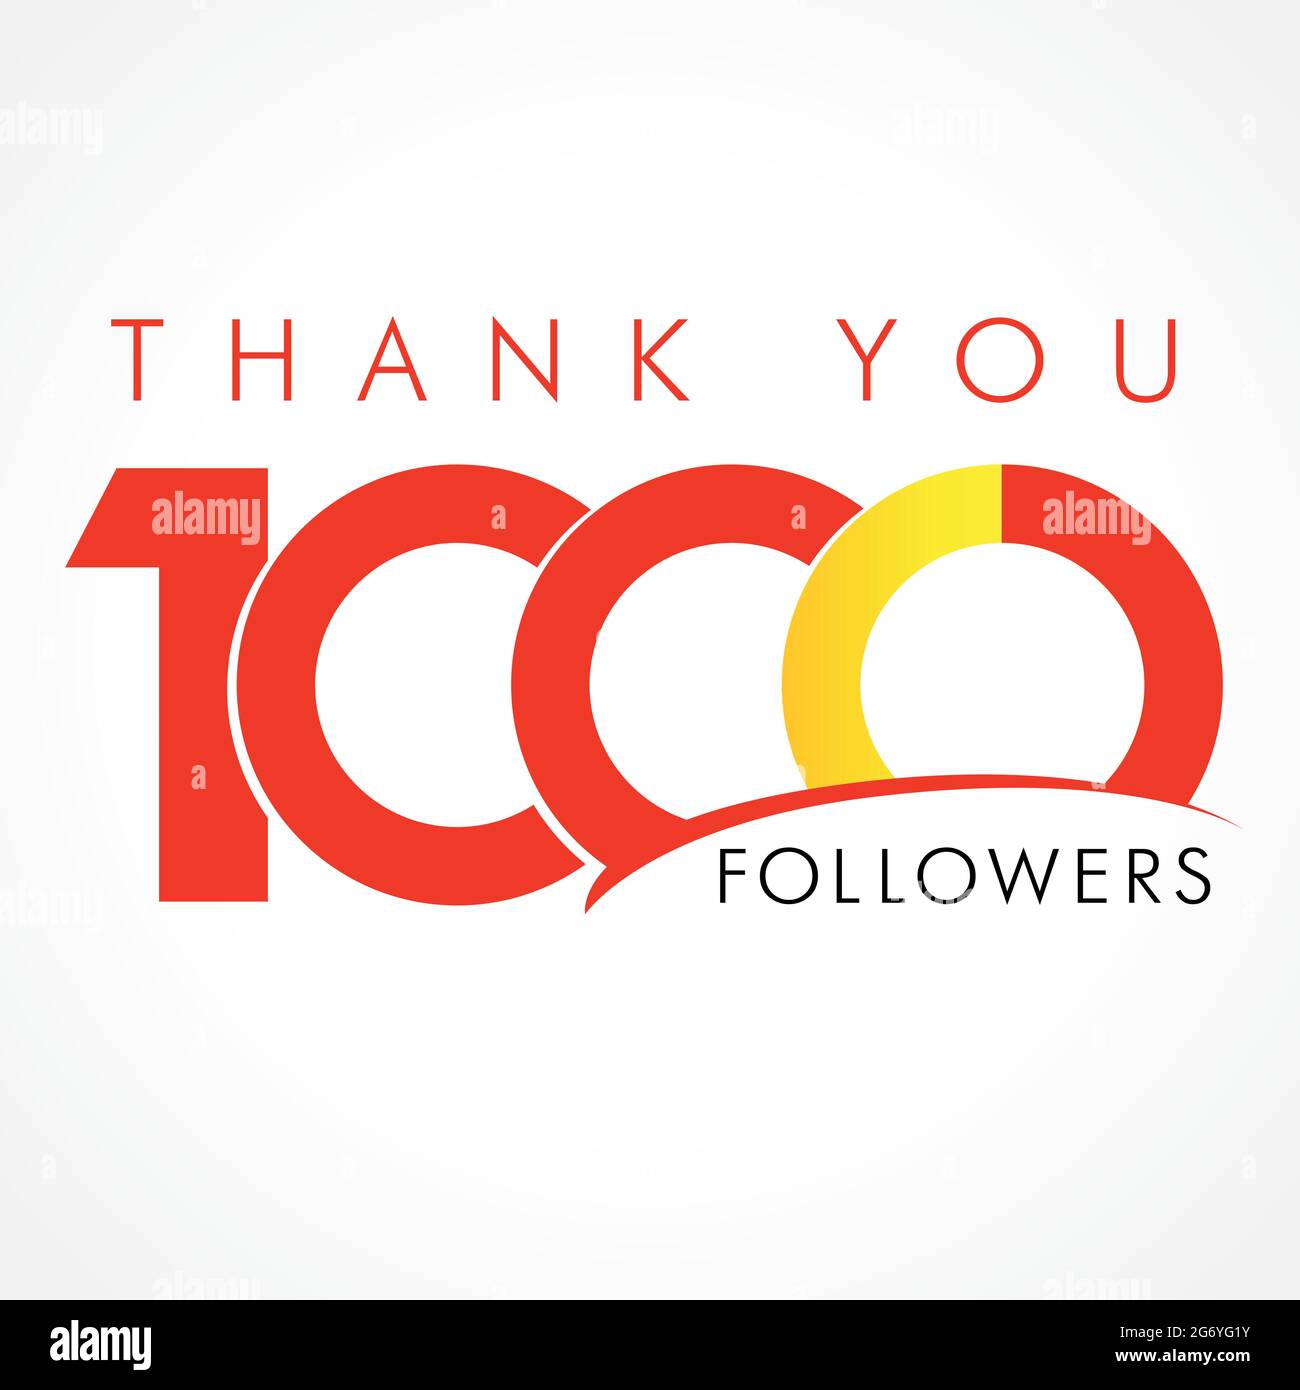 Thank you 1000 followers card. Creative thanks for following subscribers. One thousand likes celebration. Isolated abstract graphic design template. H Stock Vector